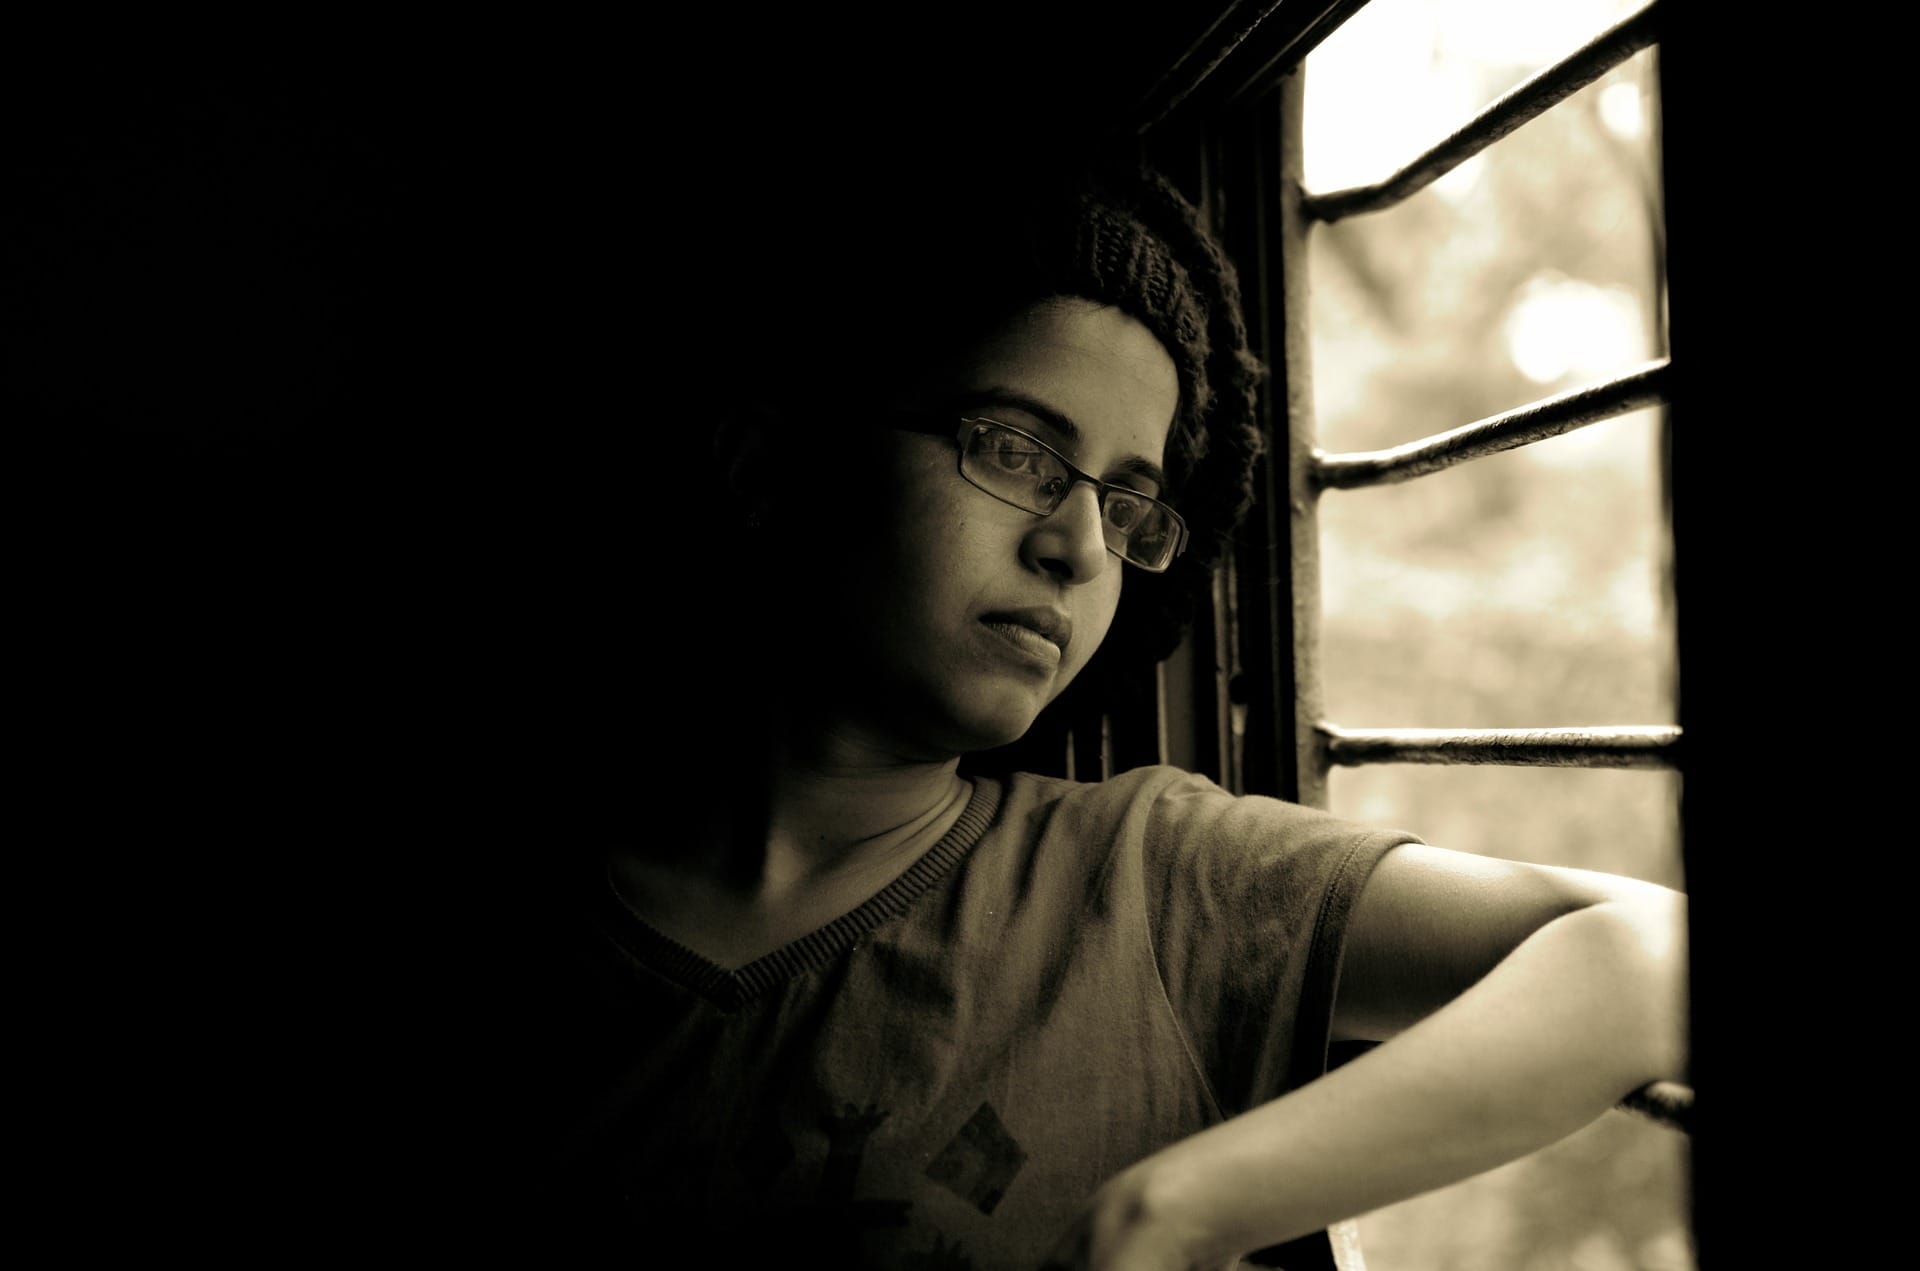 Young boy looks outside of window with gloomy look on face